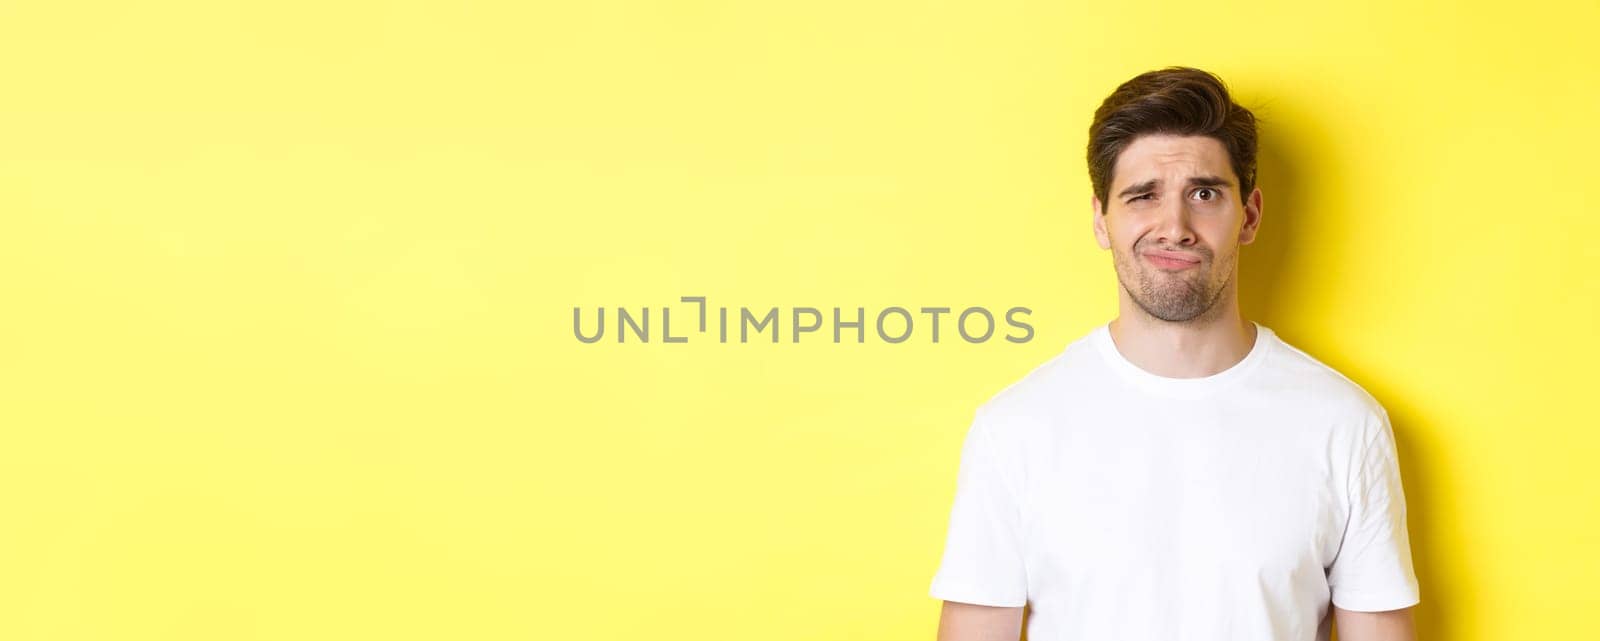 Close-up of dispelased young man in white t-shirt looking doubtful, grimacing unsatisfied, standing over yellow background.